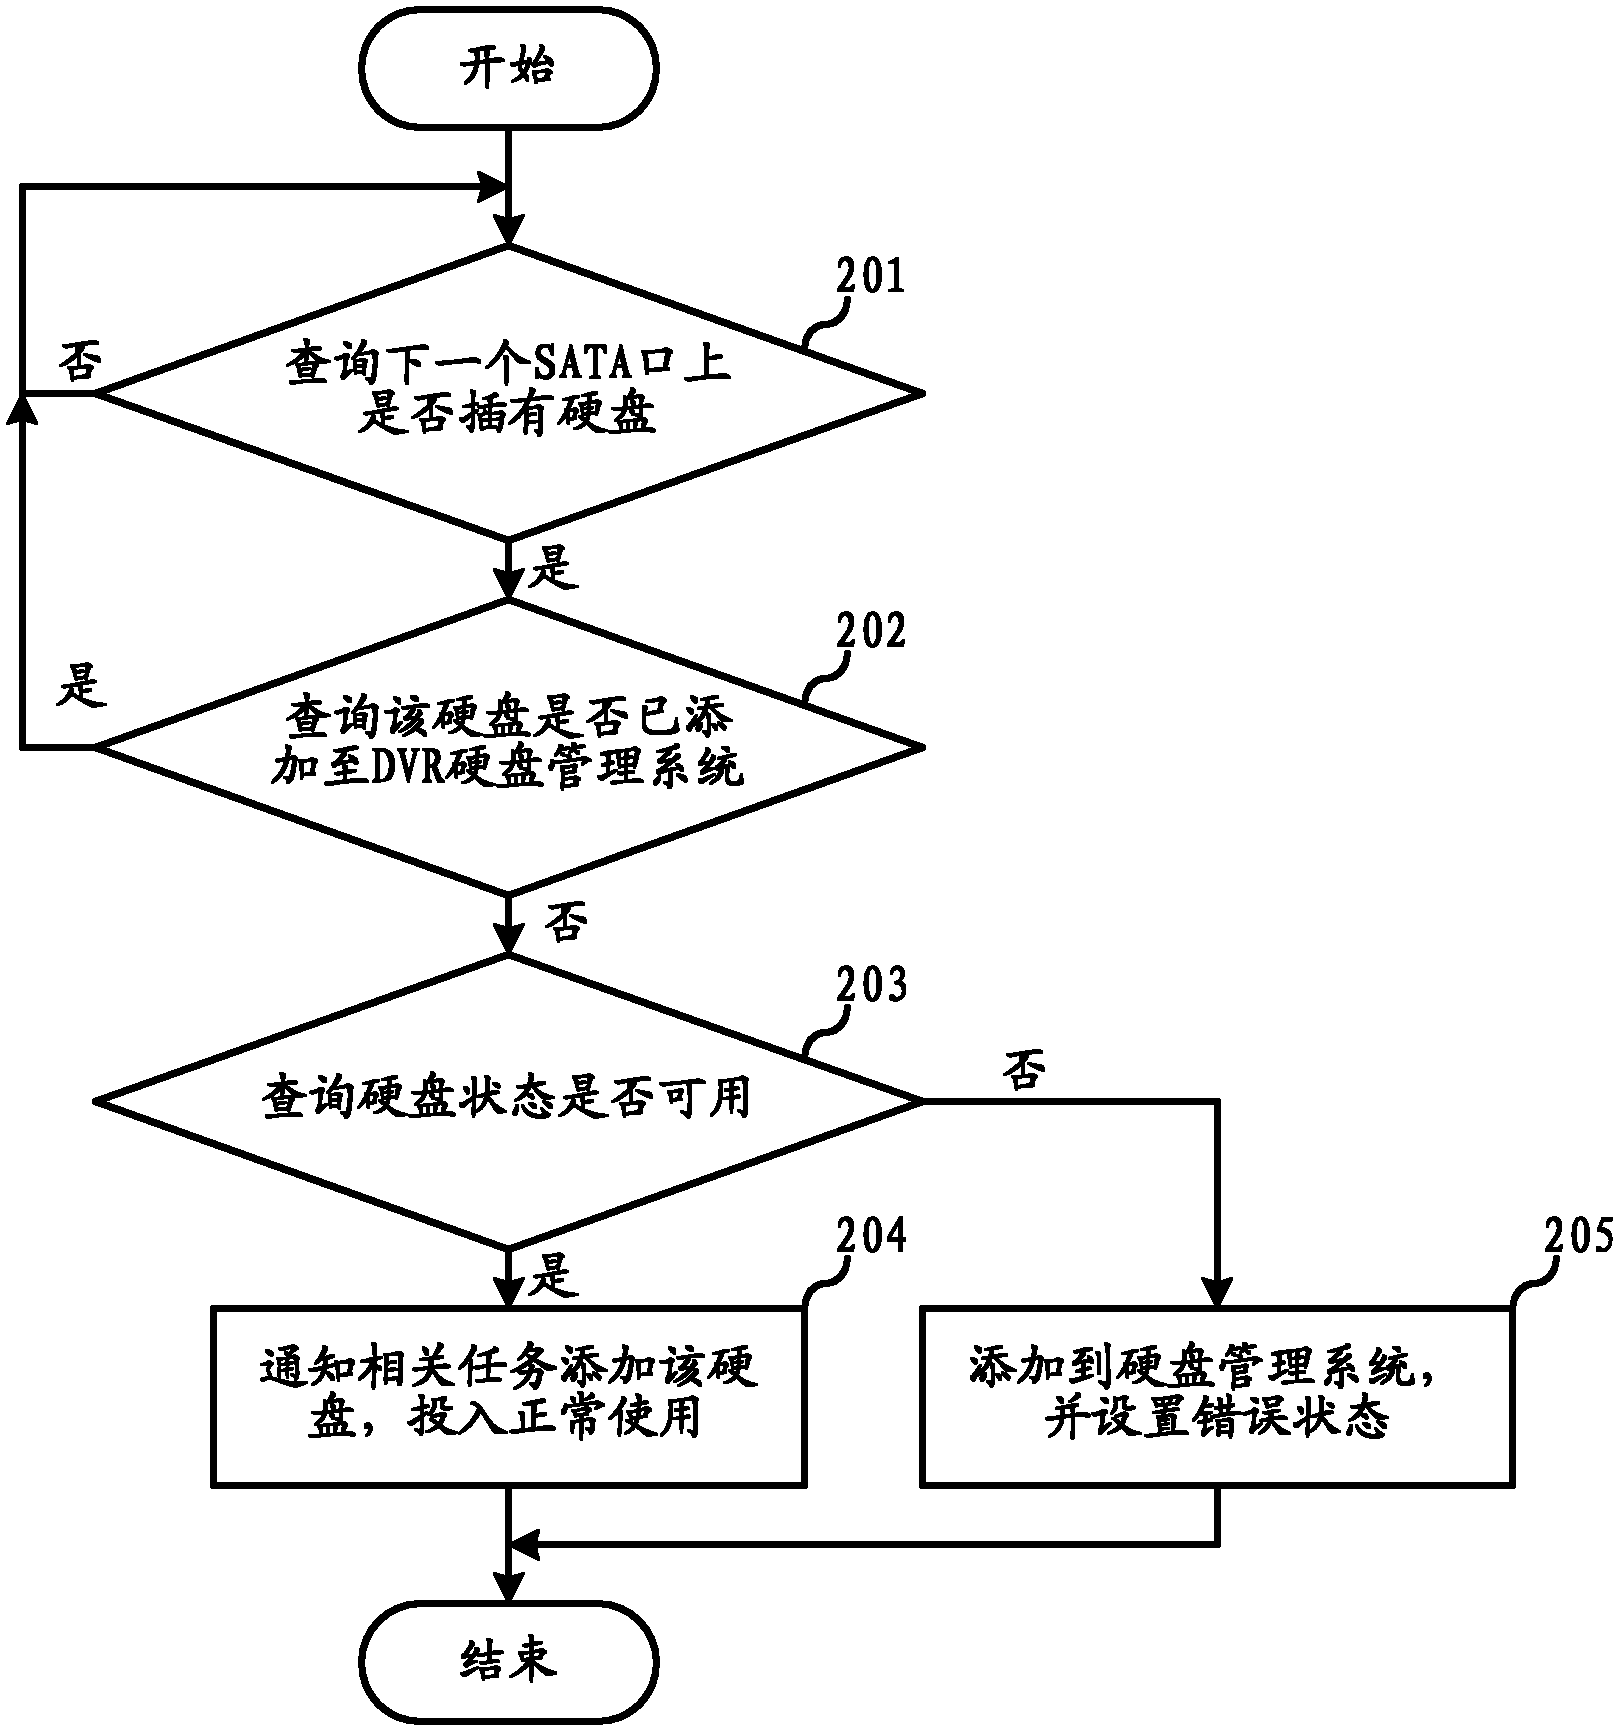 Method and device for carrying out charged uninstallation and installation of hard disk for digital video recorder